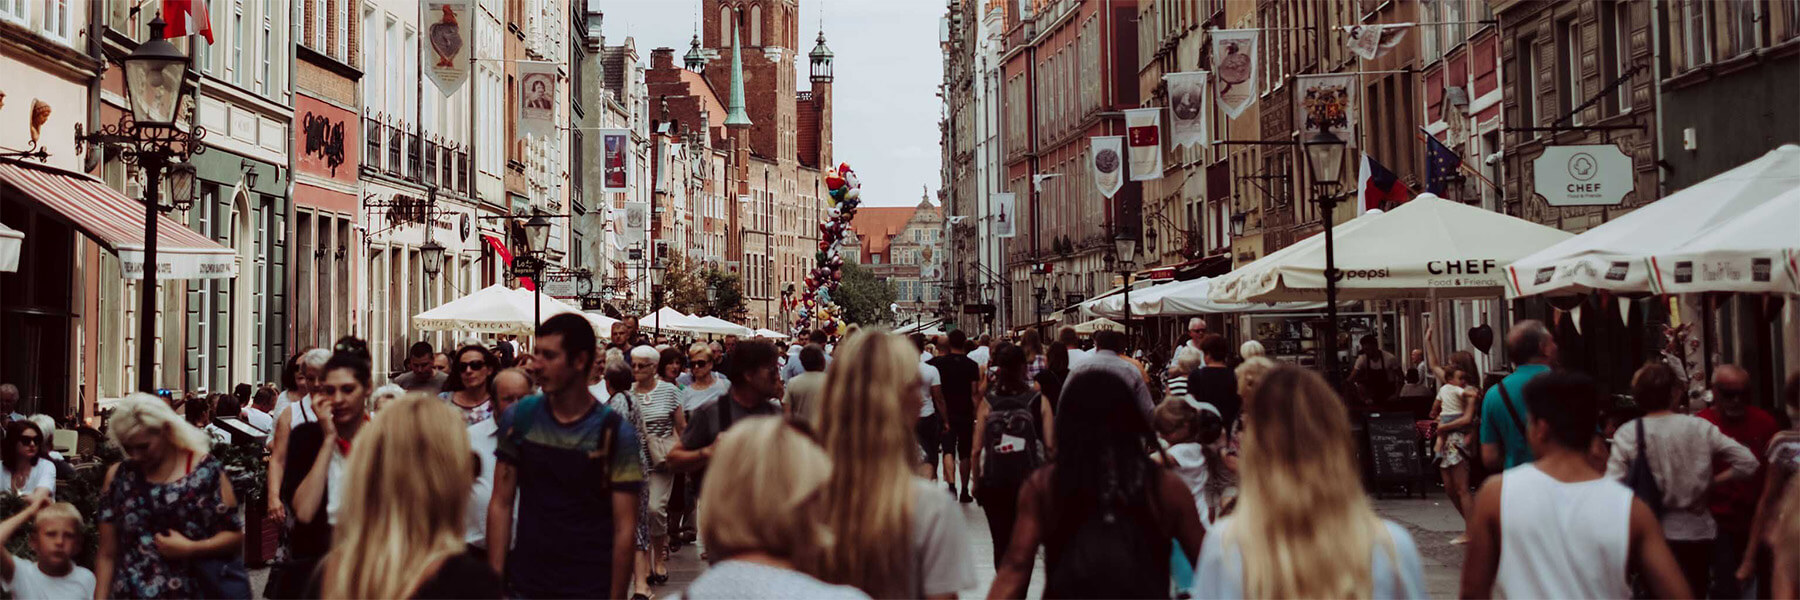 A street filled with people in Gdańsk, Poland.